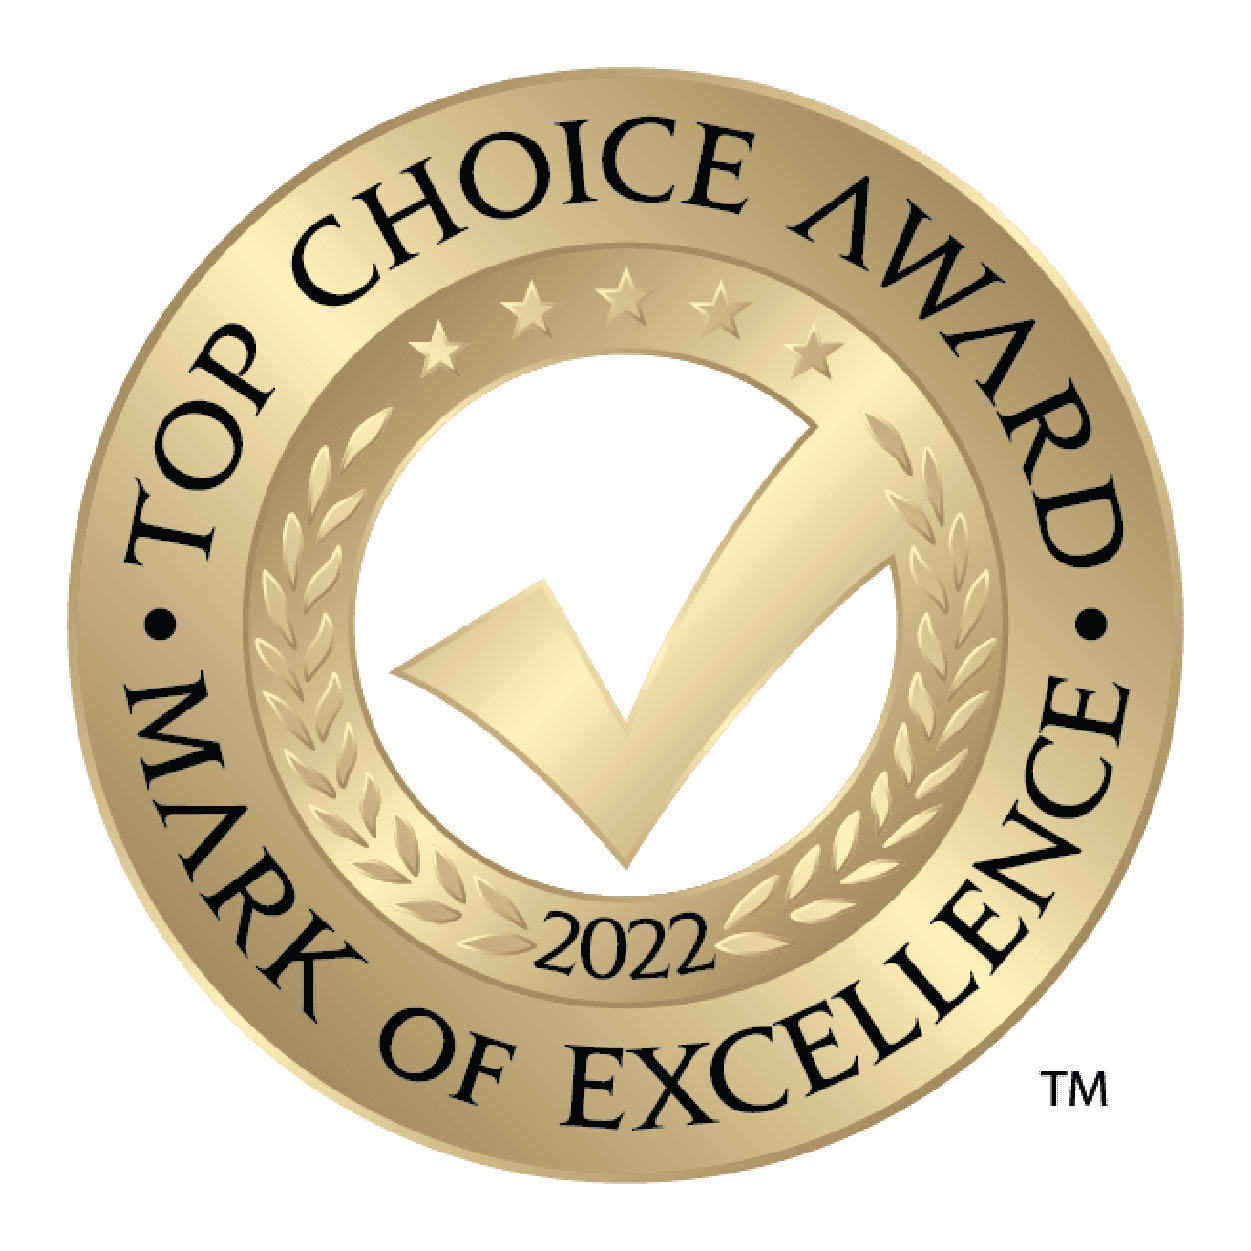 Top Choice Childcare in the GTA Award 2022